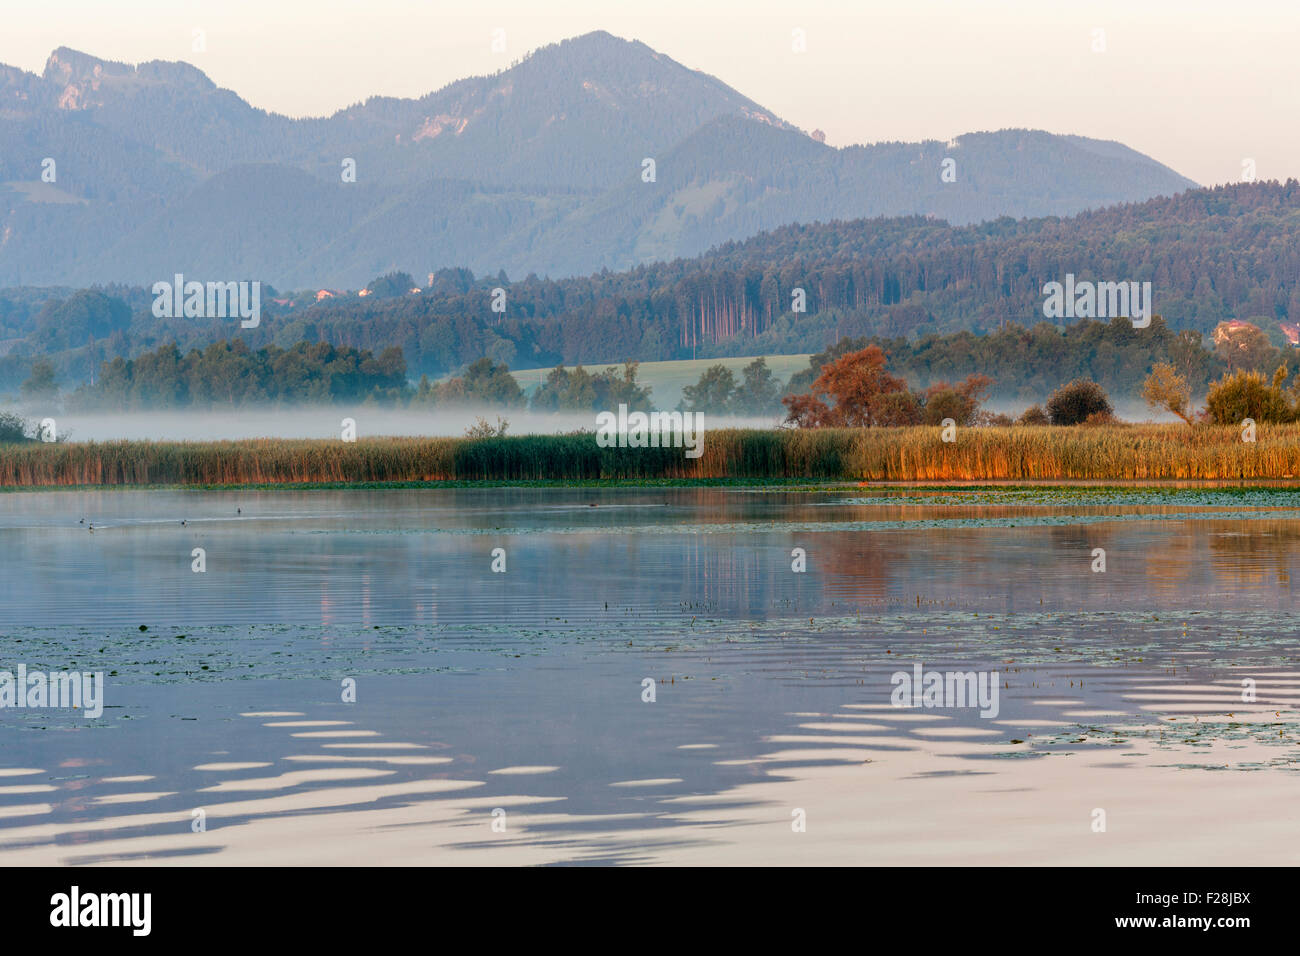 Lily pads floating on misty Chiemsee lake, Bavaria, Germany Stock Photo